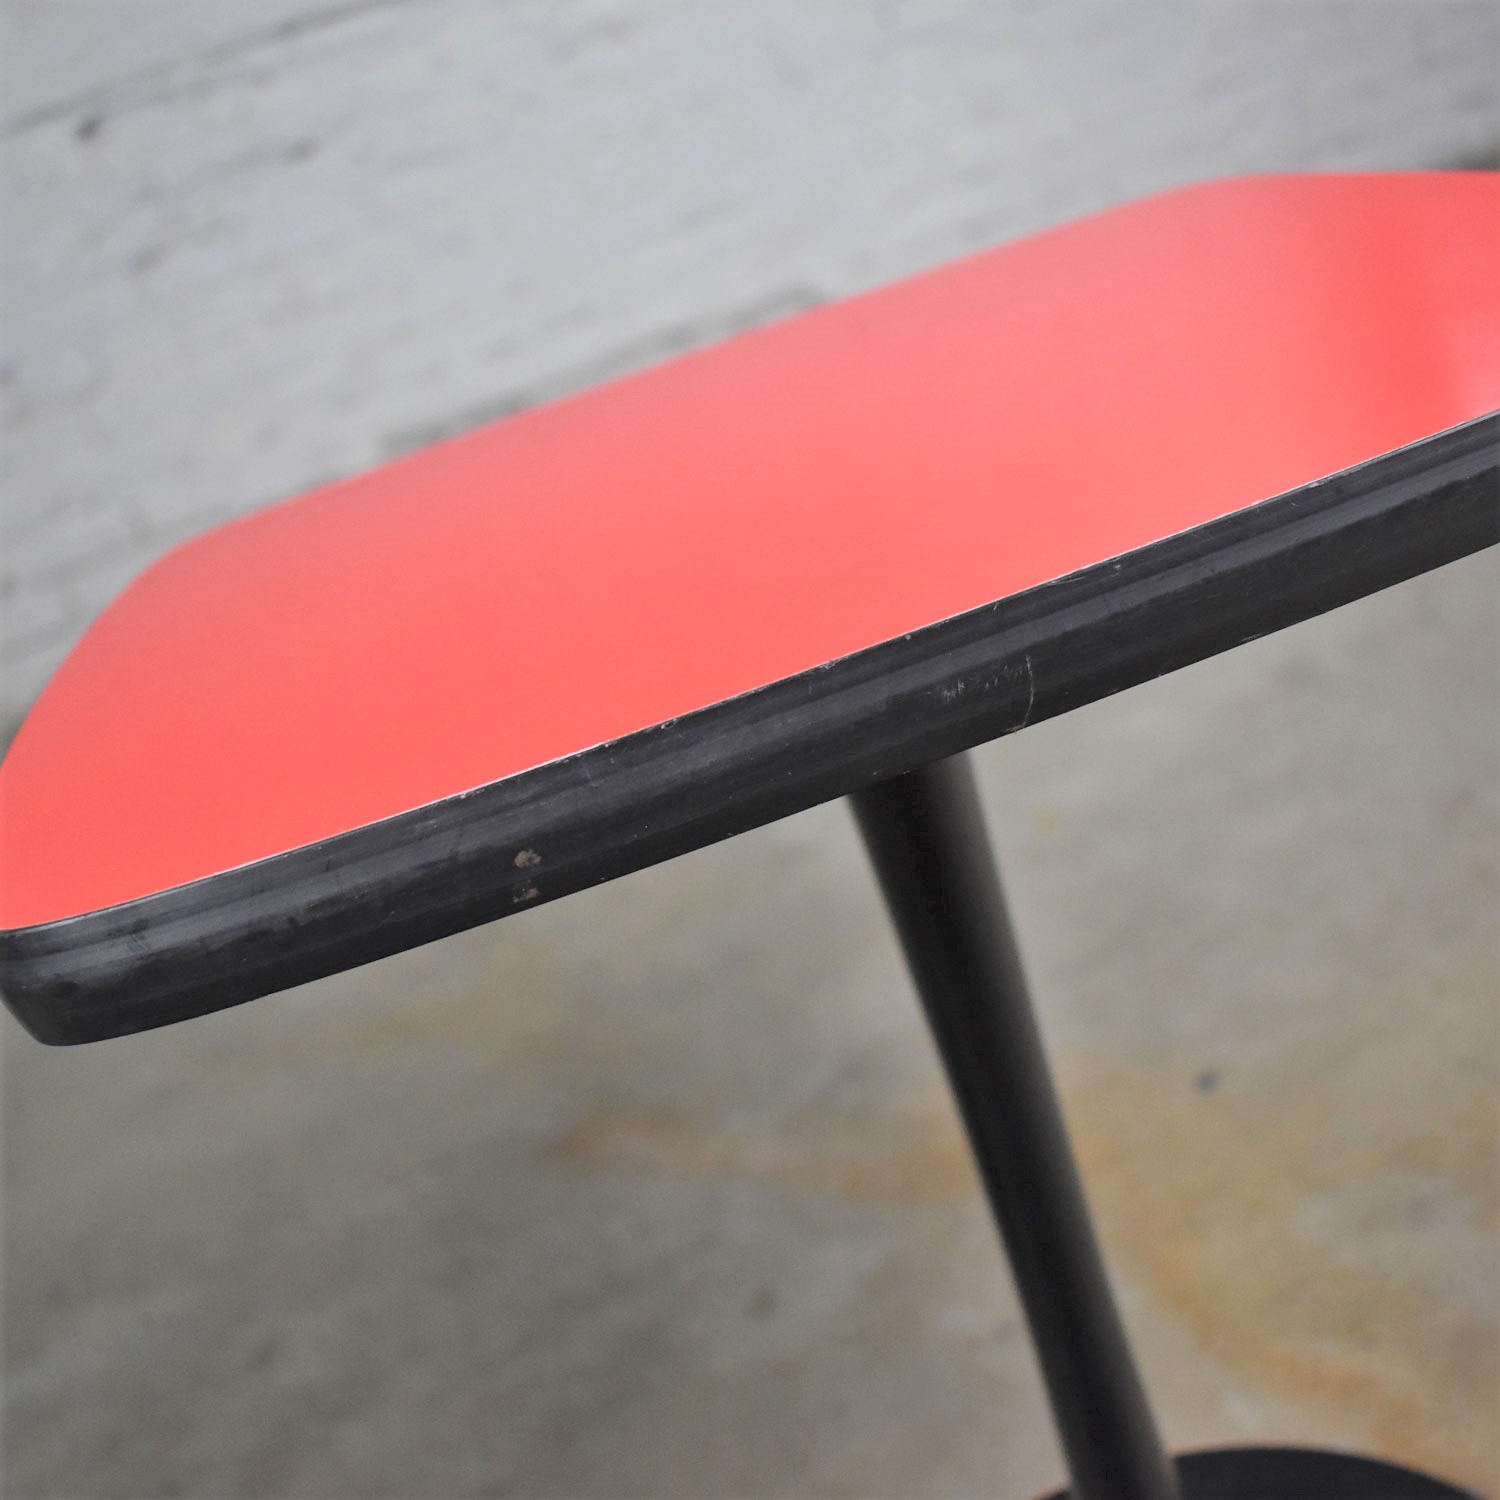 Small Pair of Red Laminate Squircle Pedestal Side Tables Mid Century Modern